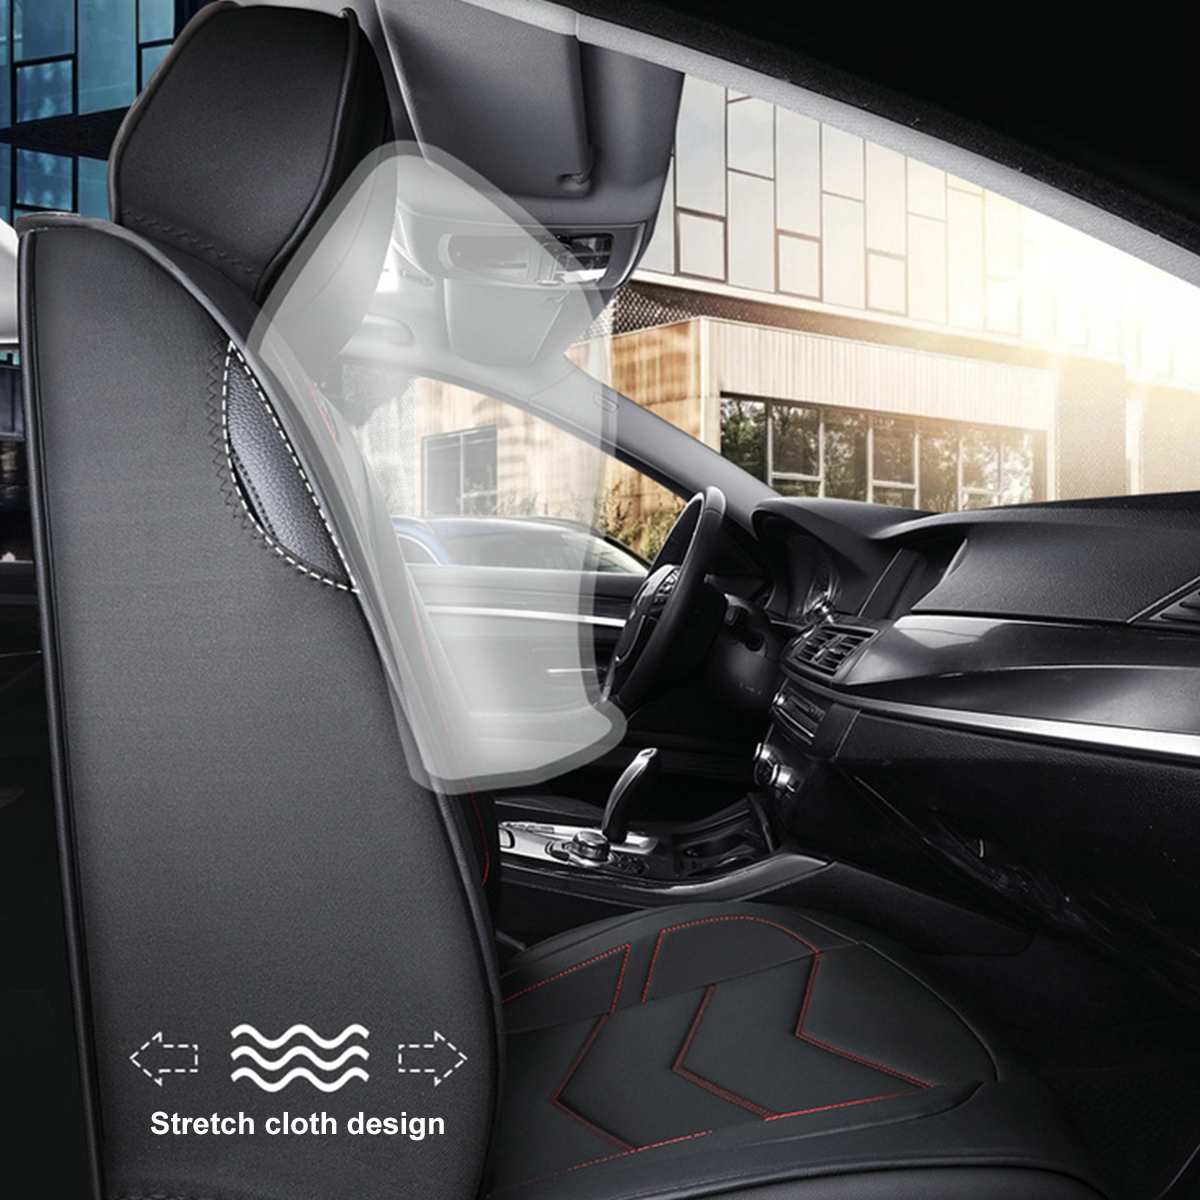 Universial Front Automobile Car Seat Cover Protector Car Covers PU Leather Seat Protector Case Non-slip fit for Most Auto Car